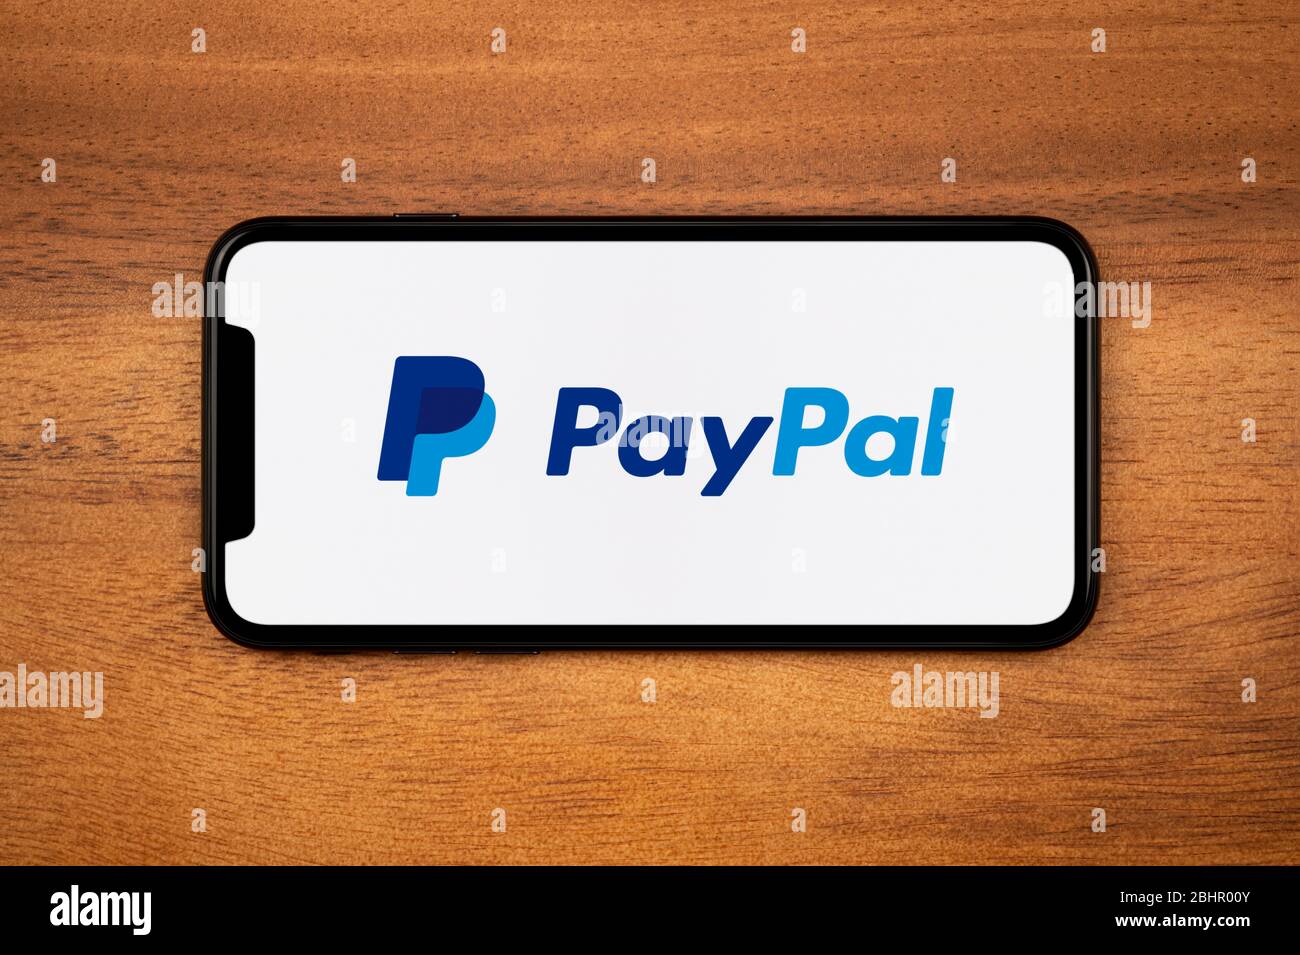 A smartphone showing the PayPal logo rests on a plain wooden table (Editorial use only). Stock Photo